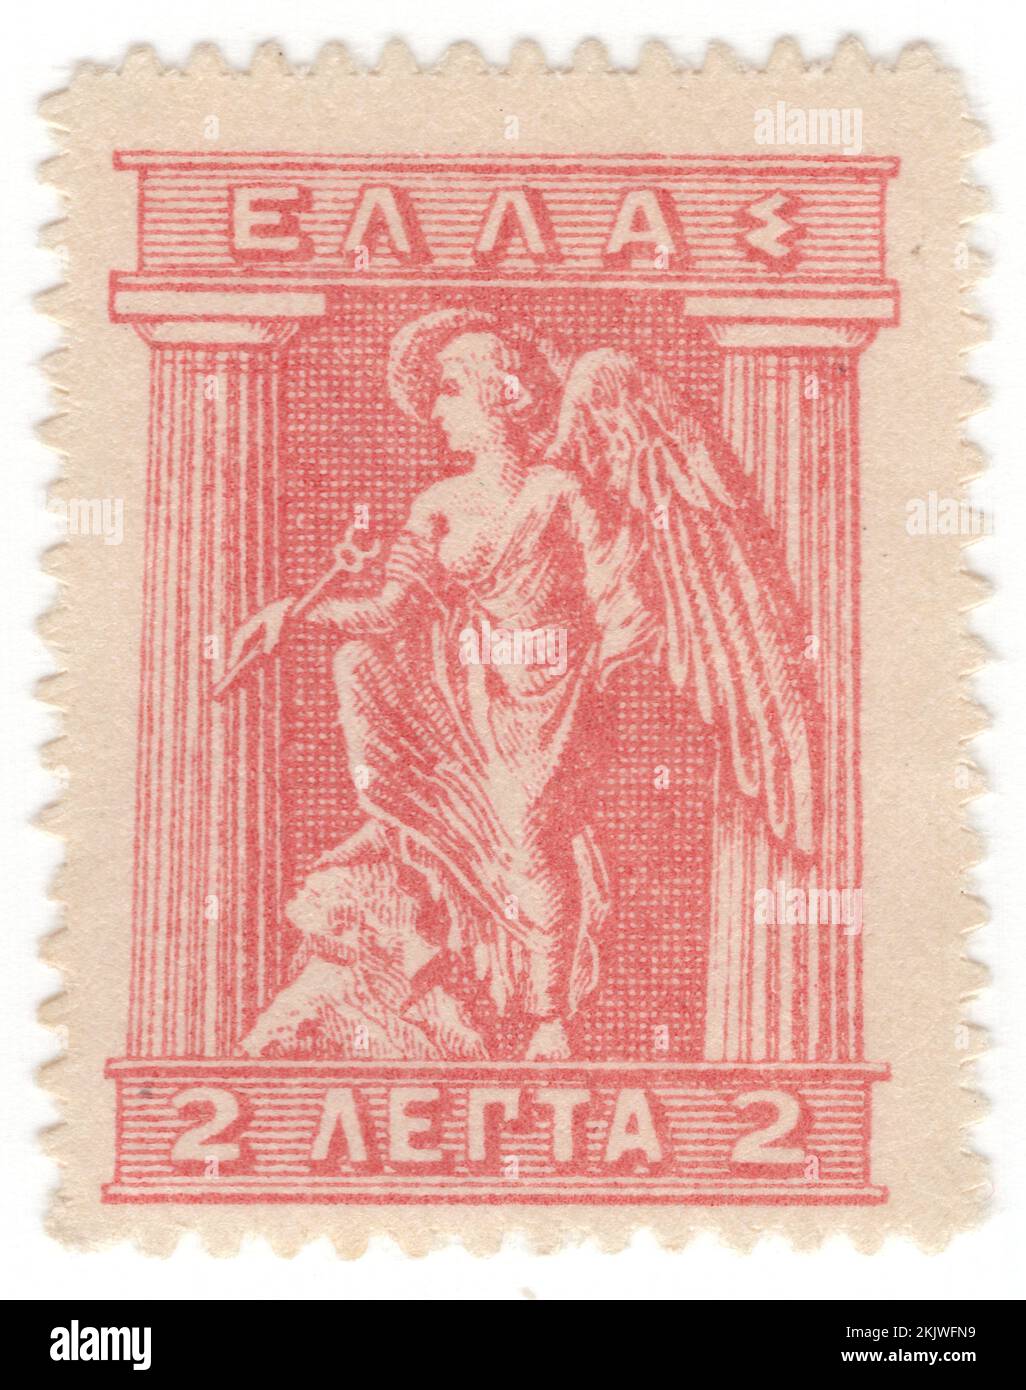 GREECE - 1911: An 20 lepta grey-lilac postage stamp depicting Iris Holding Caduceus. Designs are from Cretan and Arcadian coins of the 4th Century, B.C. In ancient Greek religion and mythology, Iris is a daughter of the gods Thaumas and Electra, the personification of the rainbow and messenger of the gods, a servant to the Olympians and especially Queen Hera. Iris appears in several stories carrying messages from and to the gods or running errands but has no unique mythology of her own Stock Photo